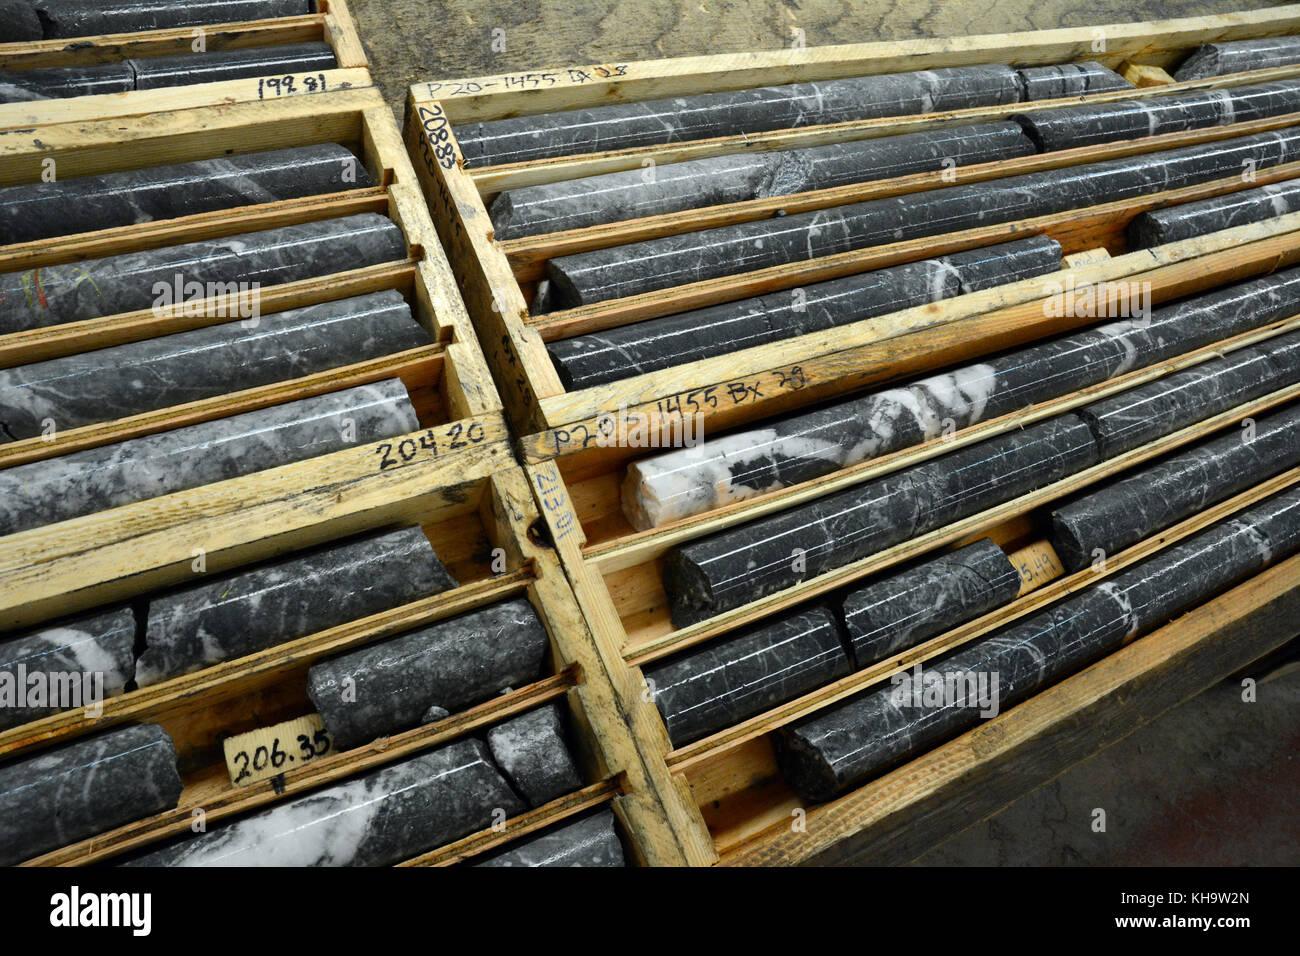 Rock core samples taken by a mining exploration company prospecting for gold, near Stewart, British Columbia, Canada. Stock Photo